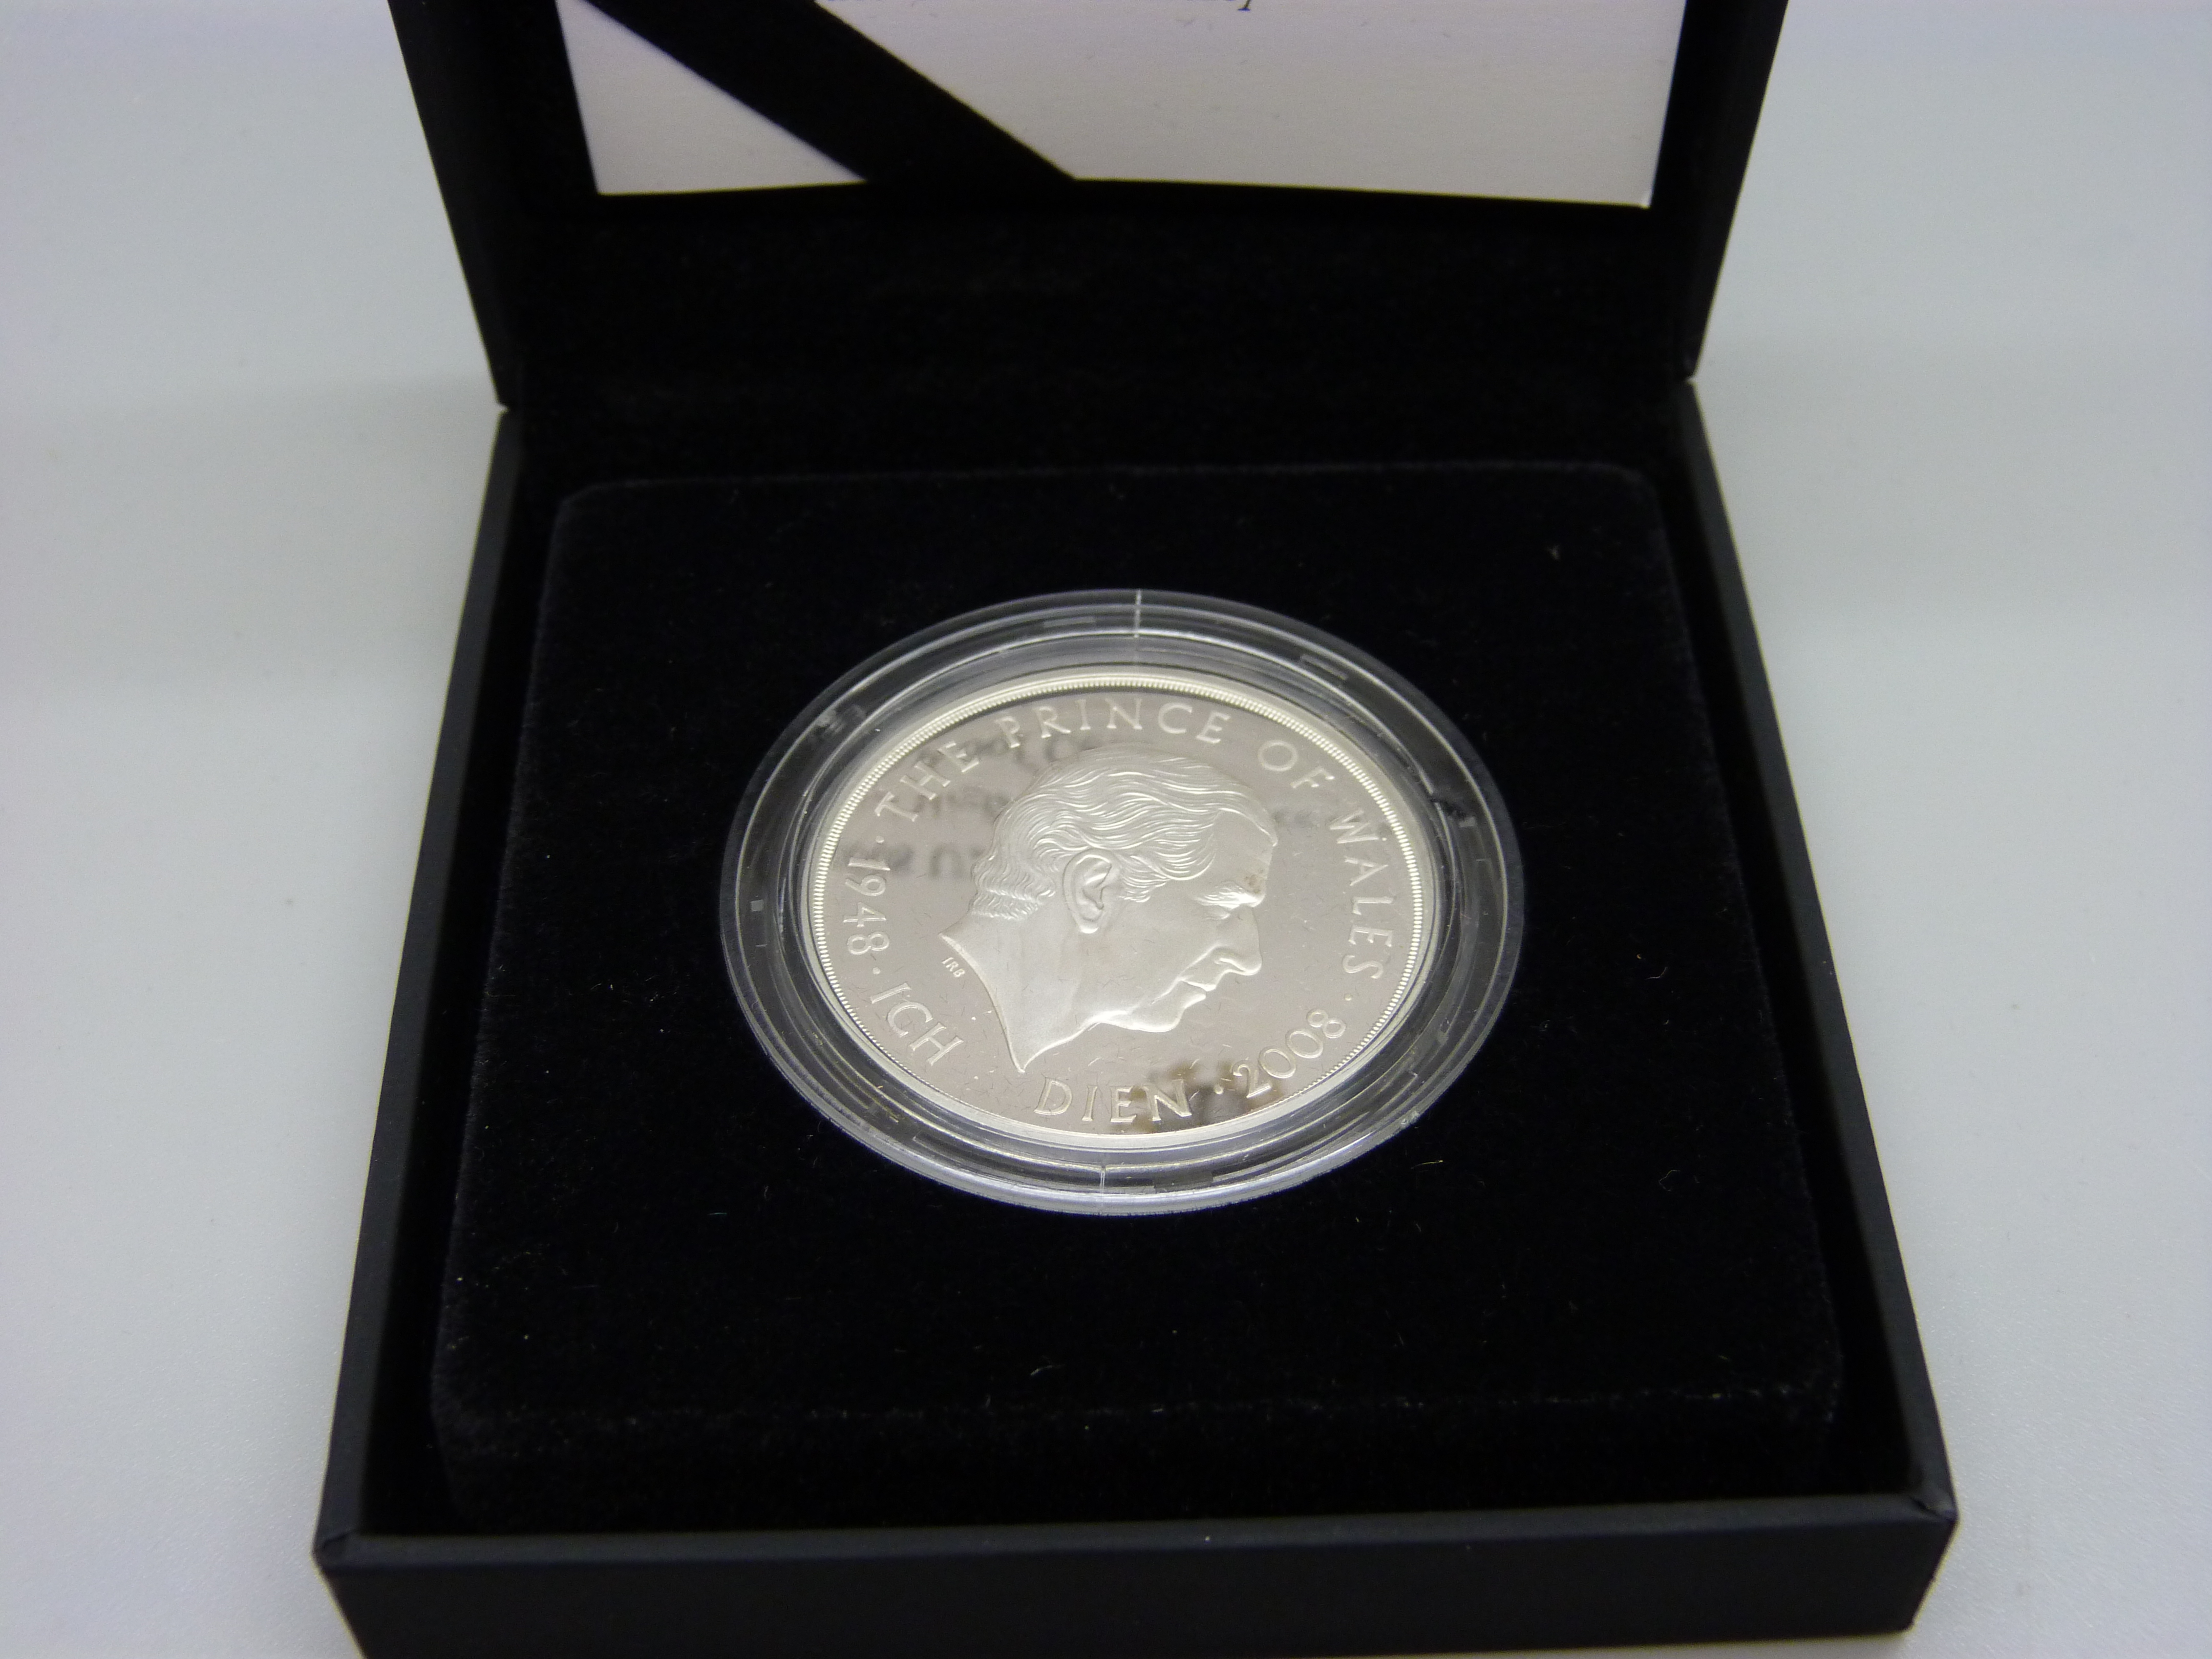 A Royal Mint 2008 Prince of Wales silver proof £5 coin, cased - Image 2 of 3